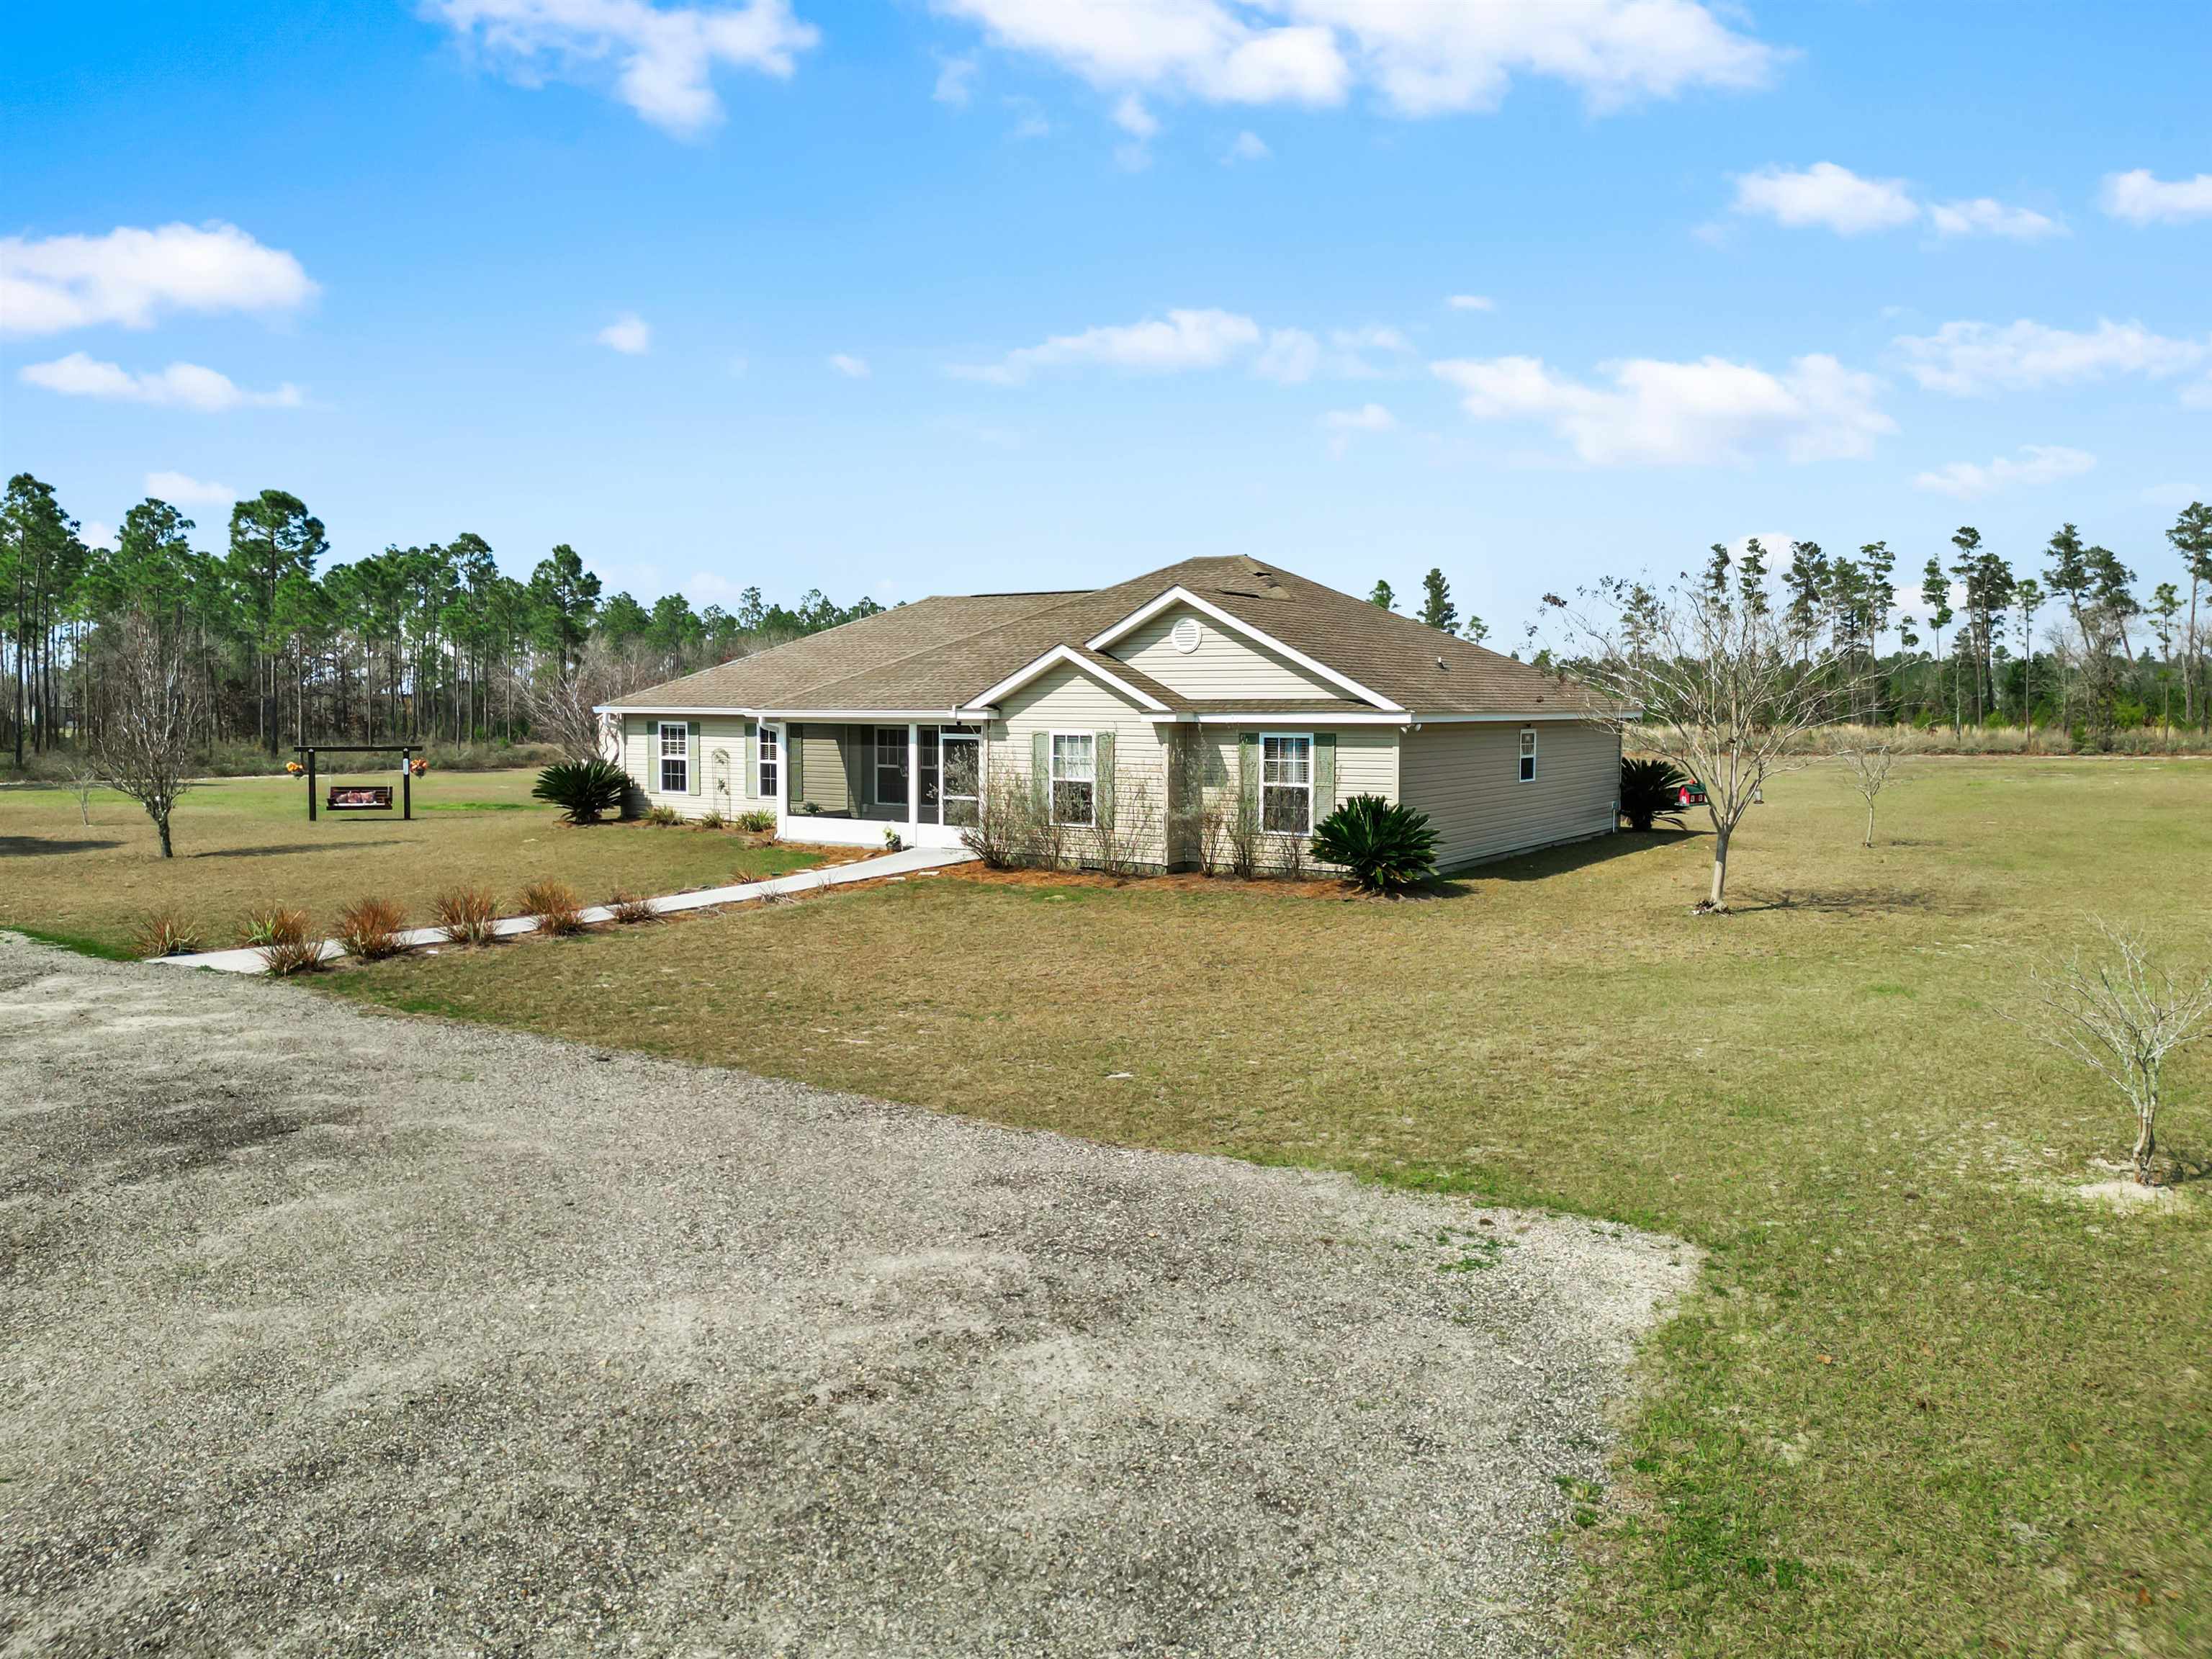 15088 NW L And H Road,BRISTOL,Florida 32321,4 Bedrooms Bedrooms,2 BathroomsBathrooms,Detached single family,15088 NW L And H Road,368916